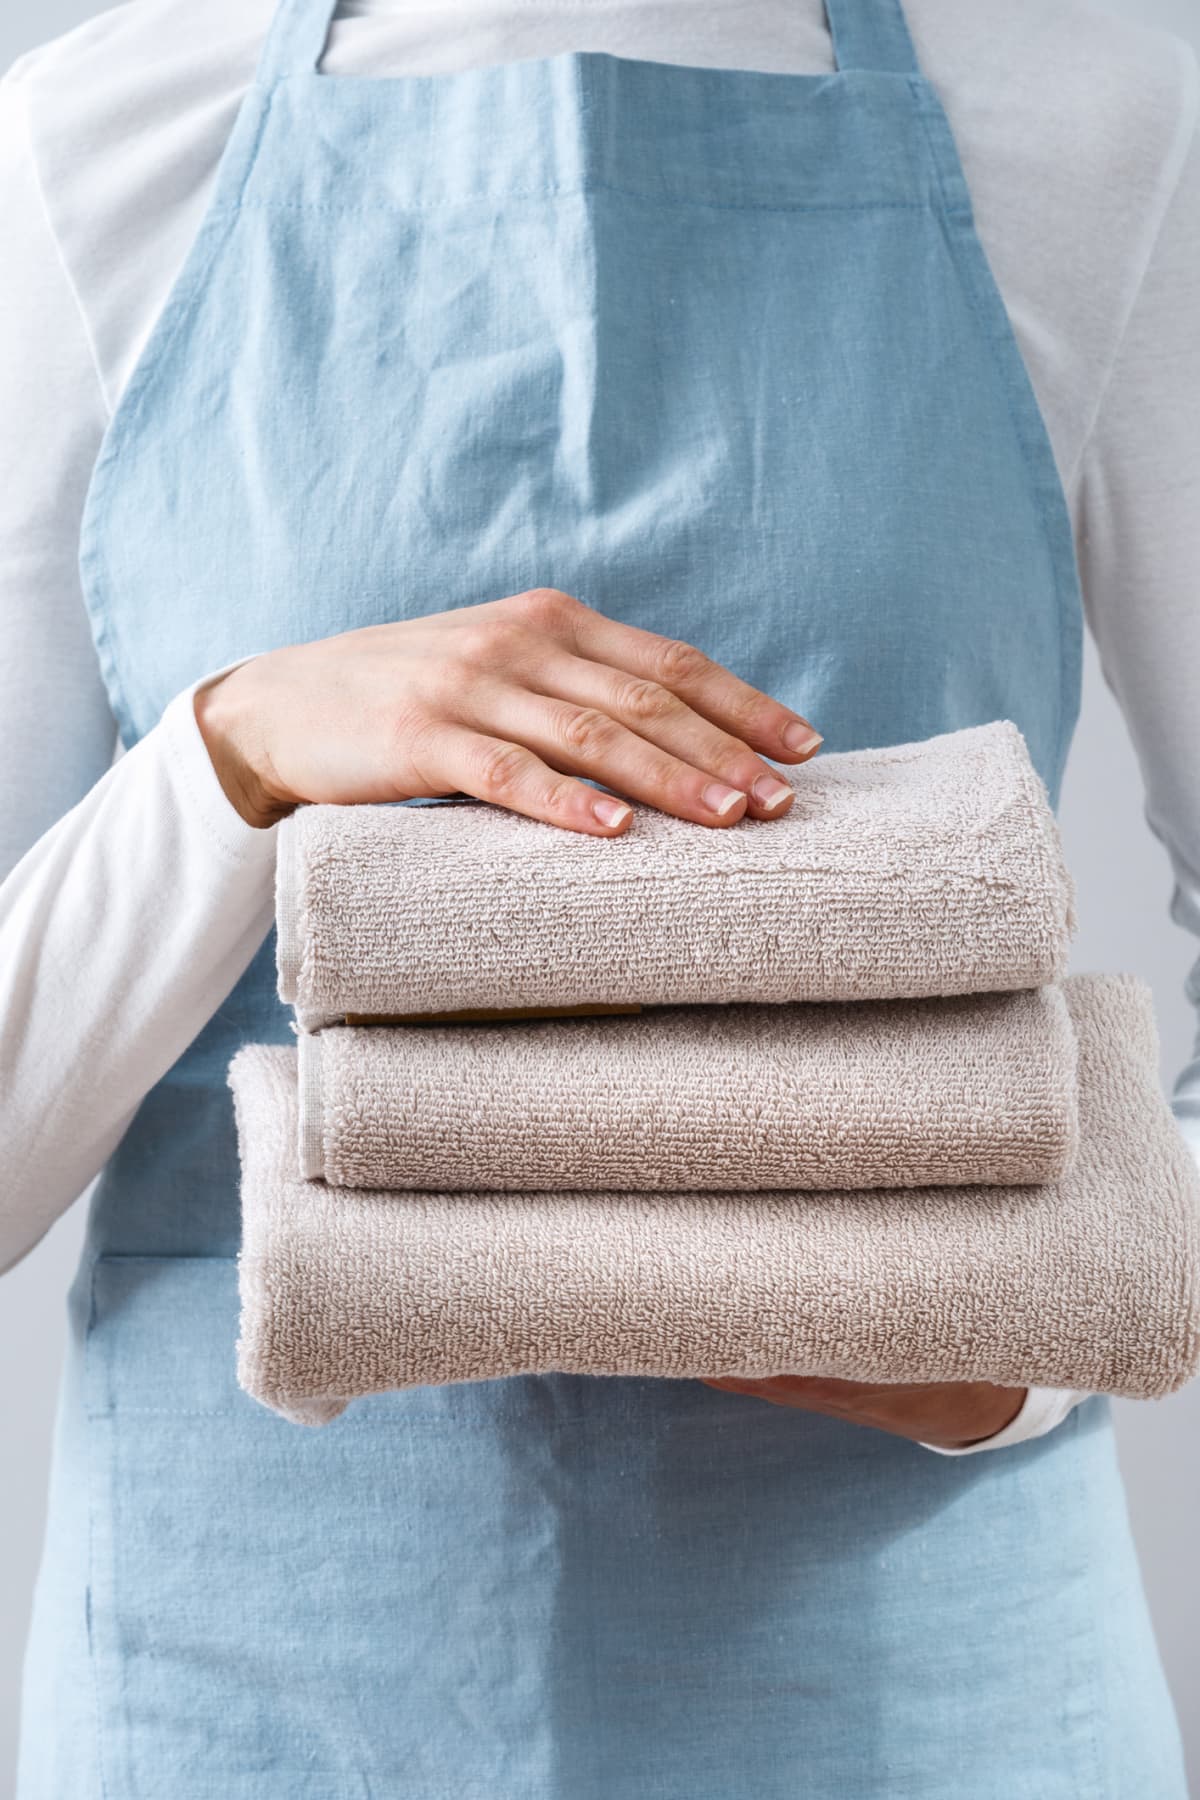 A person holding a stack of folded towels